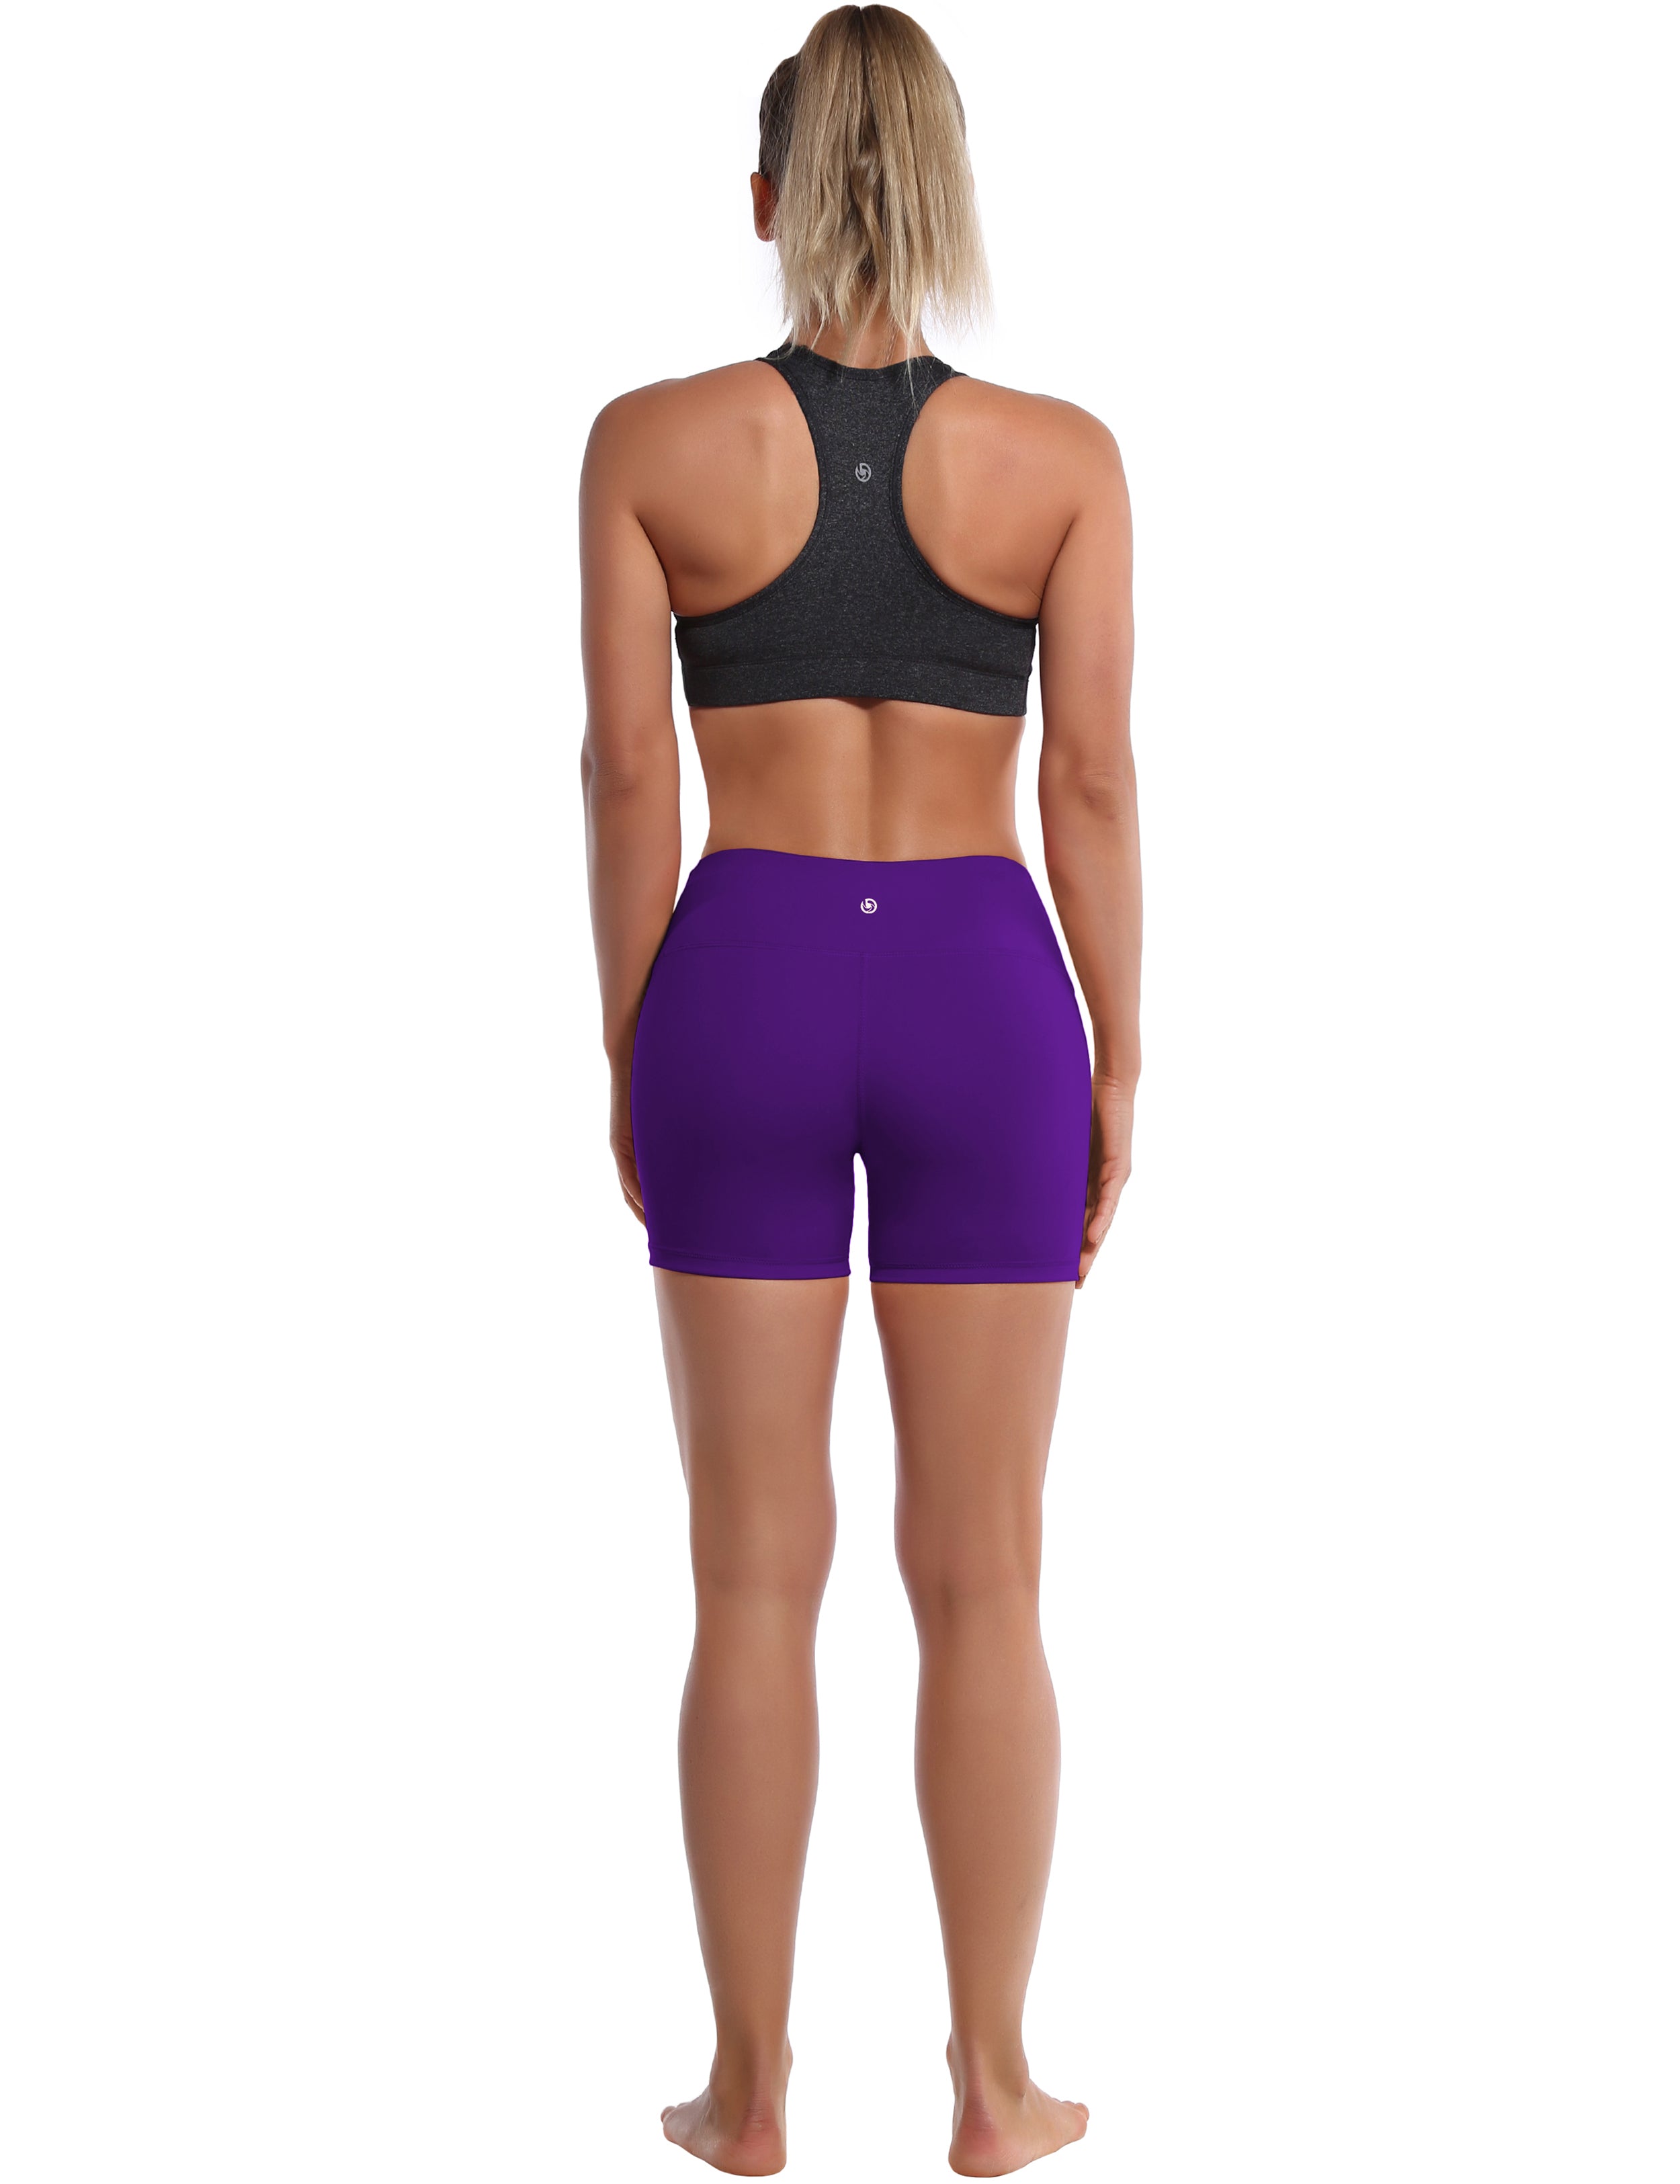 4" Yoga Shorts eggplantpurple Sleek, soft, smooth and totally comfortable: our newest style is here. Softest-ever fabric High elasticity High density 4-way stretch Fabric doesn't attract lint easily No see-through Moisture-wicking Machine wash 75% Nylon, 25% Spandex